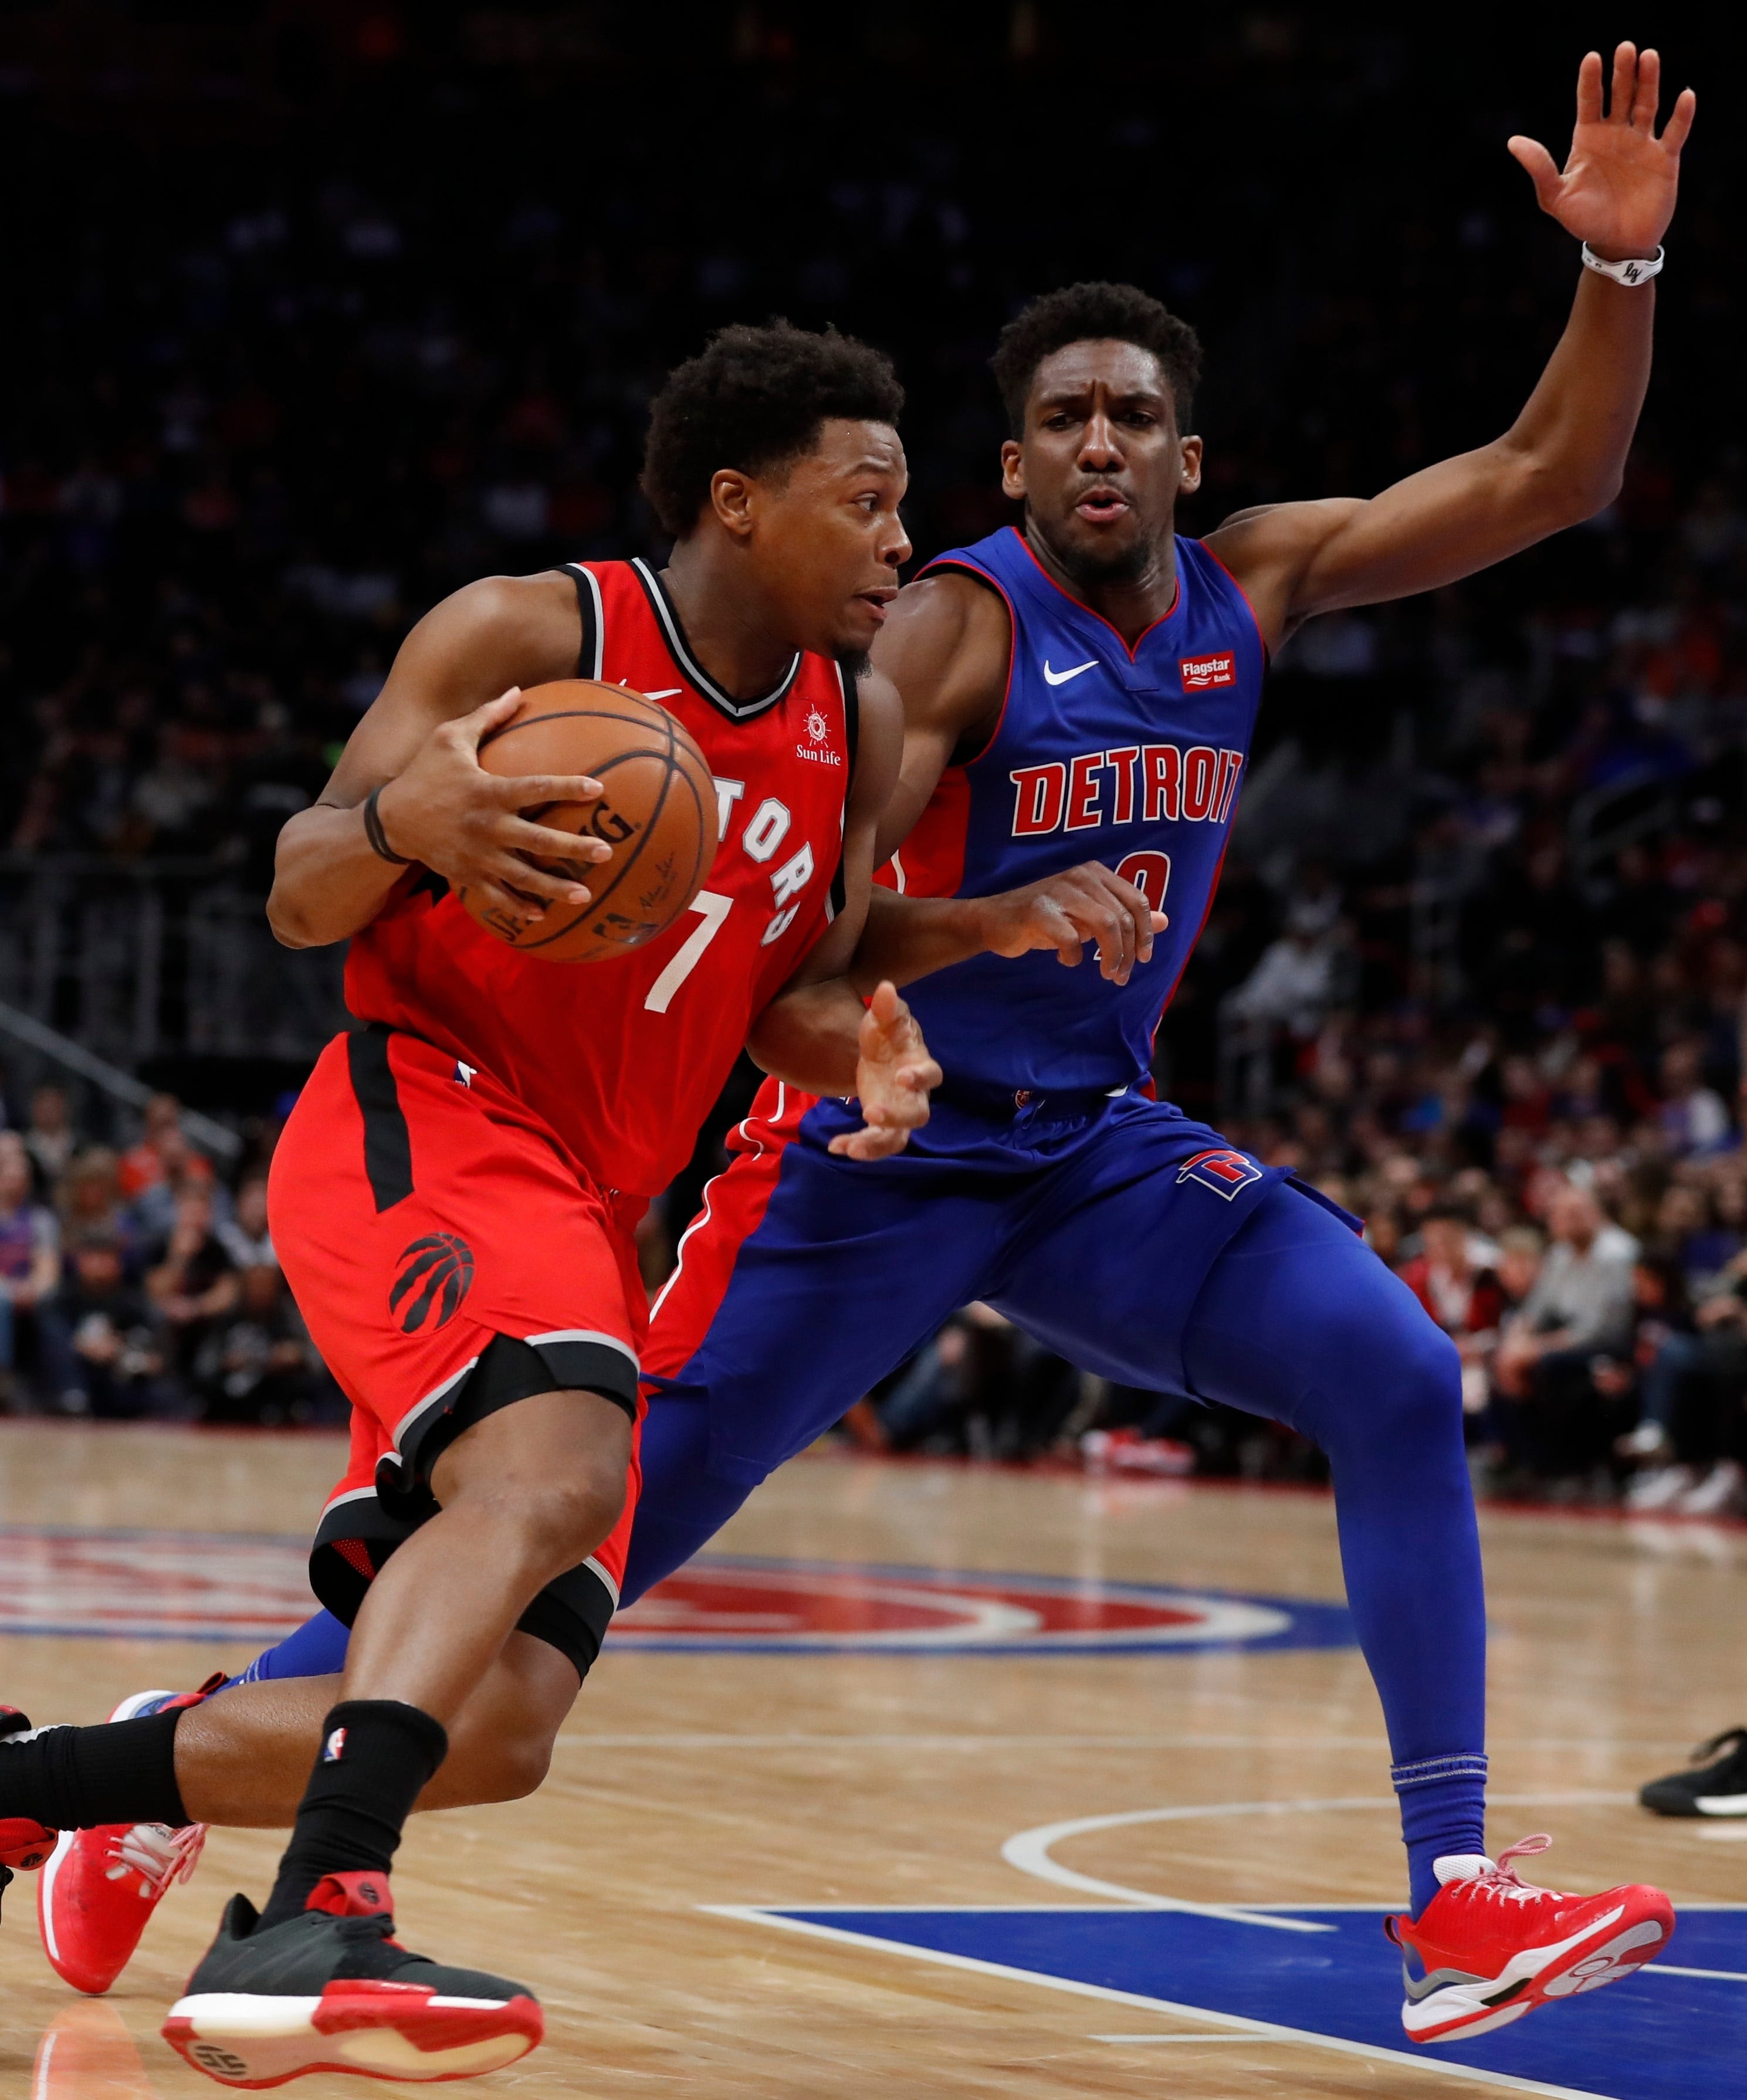 Toronto Raptors guard Kyle Lowry (7) drives on Detroit Pistons guard Langston Galloway (9) during the second half.